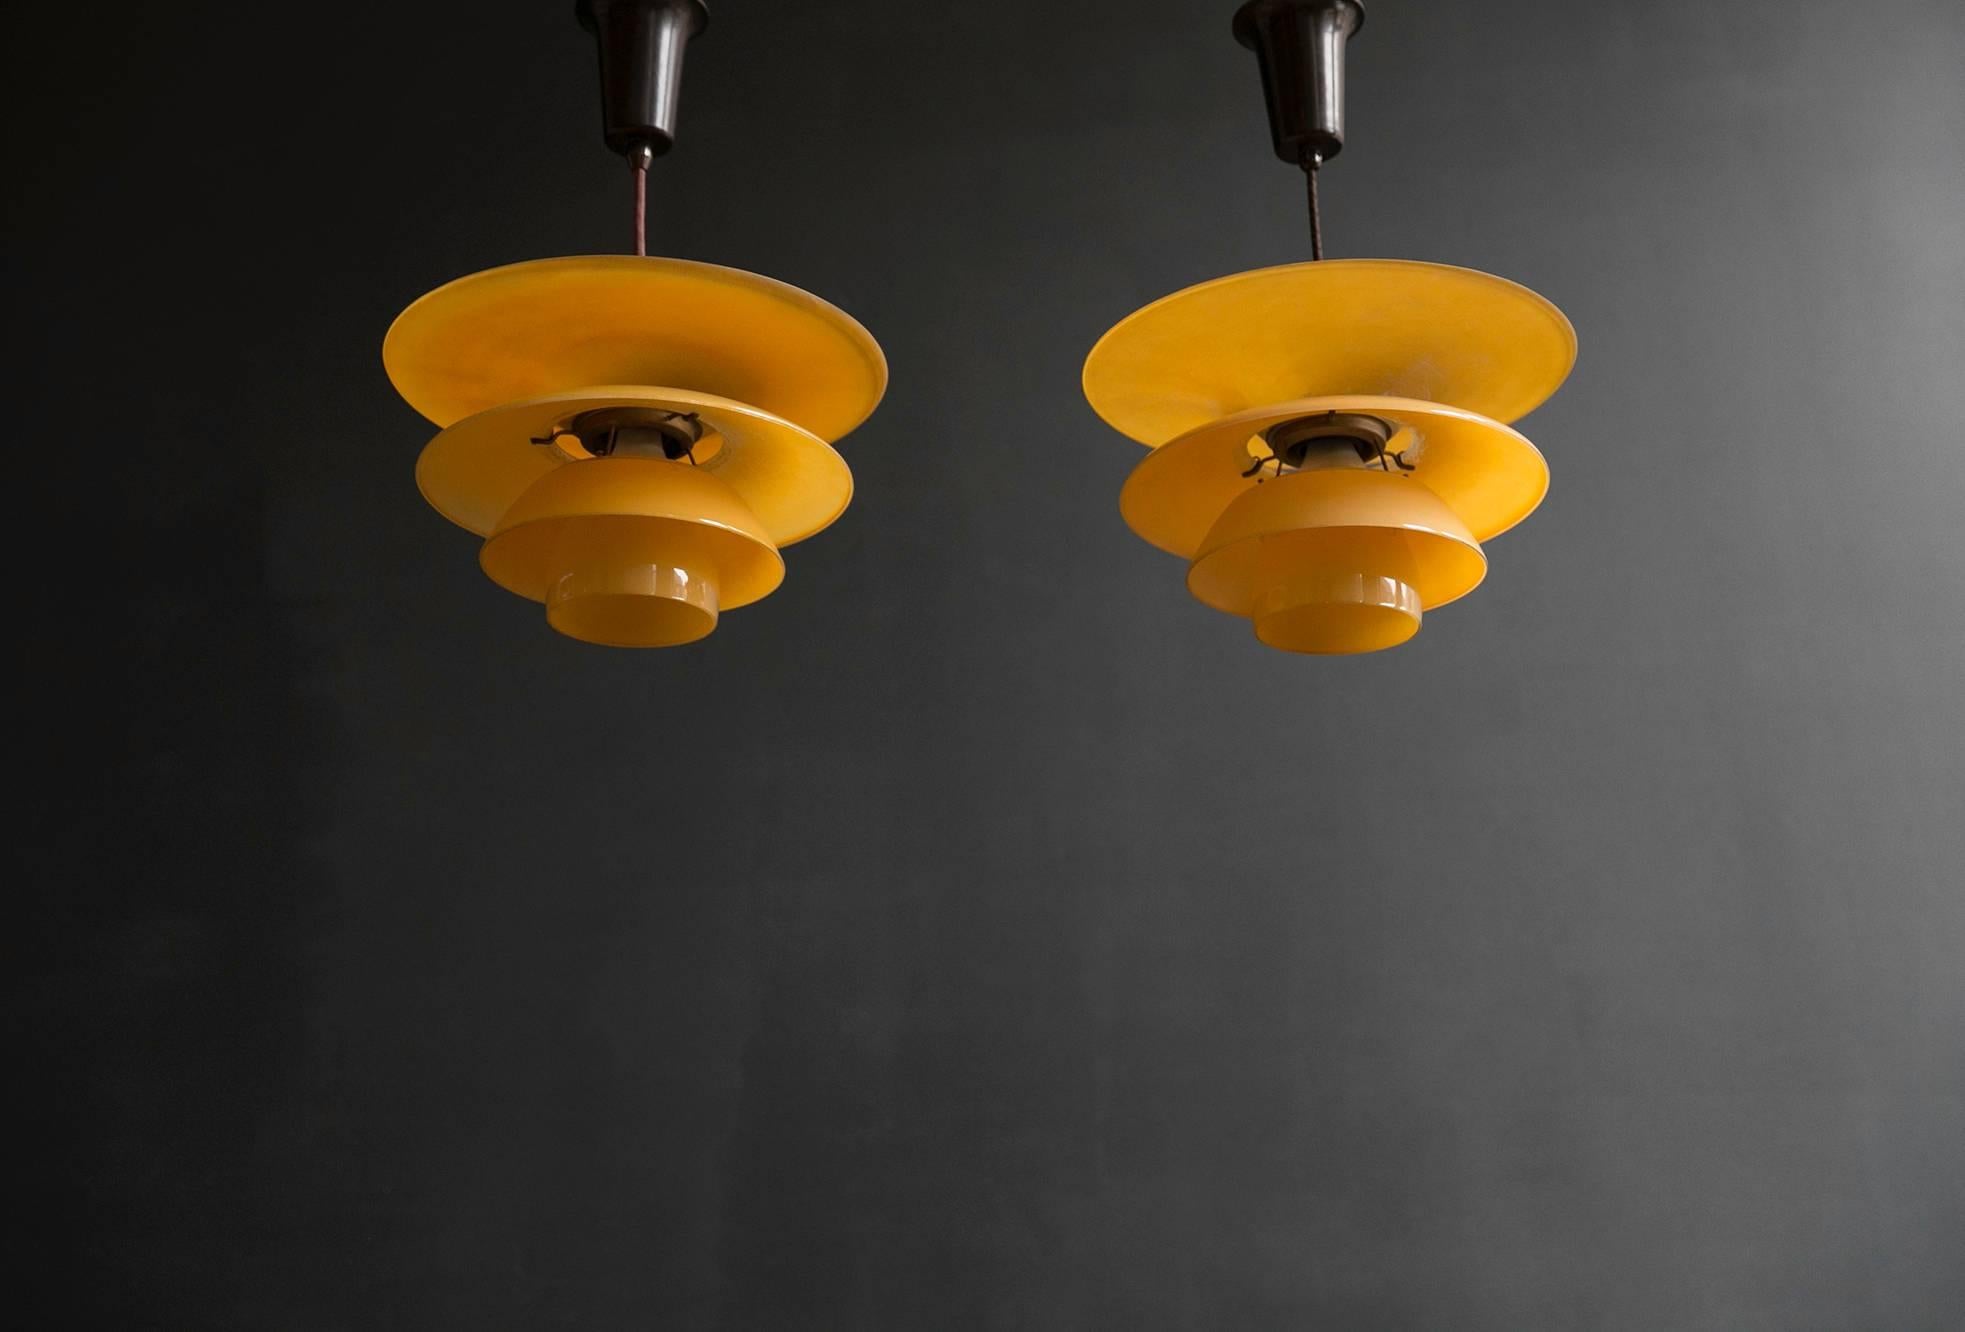 Poul Henningsen 4/ 3.5 /3 Four-Shade Pendant Lamps in Yellow Painted Matt Glass. A pair of Poul Henningsen pendants in yellow painted matte glass with bakelite sockets from the 1930s. Henningsen's four shade lamp in matte glass was added to Louis